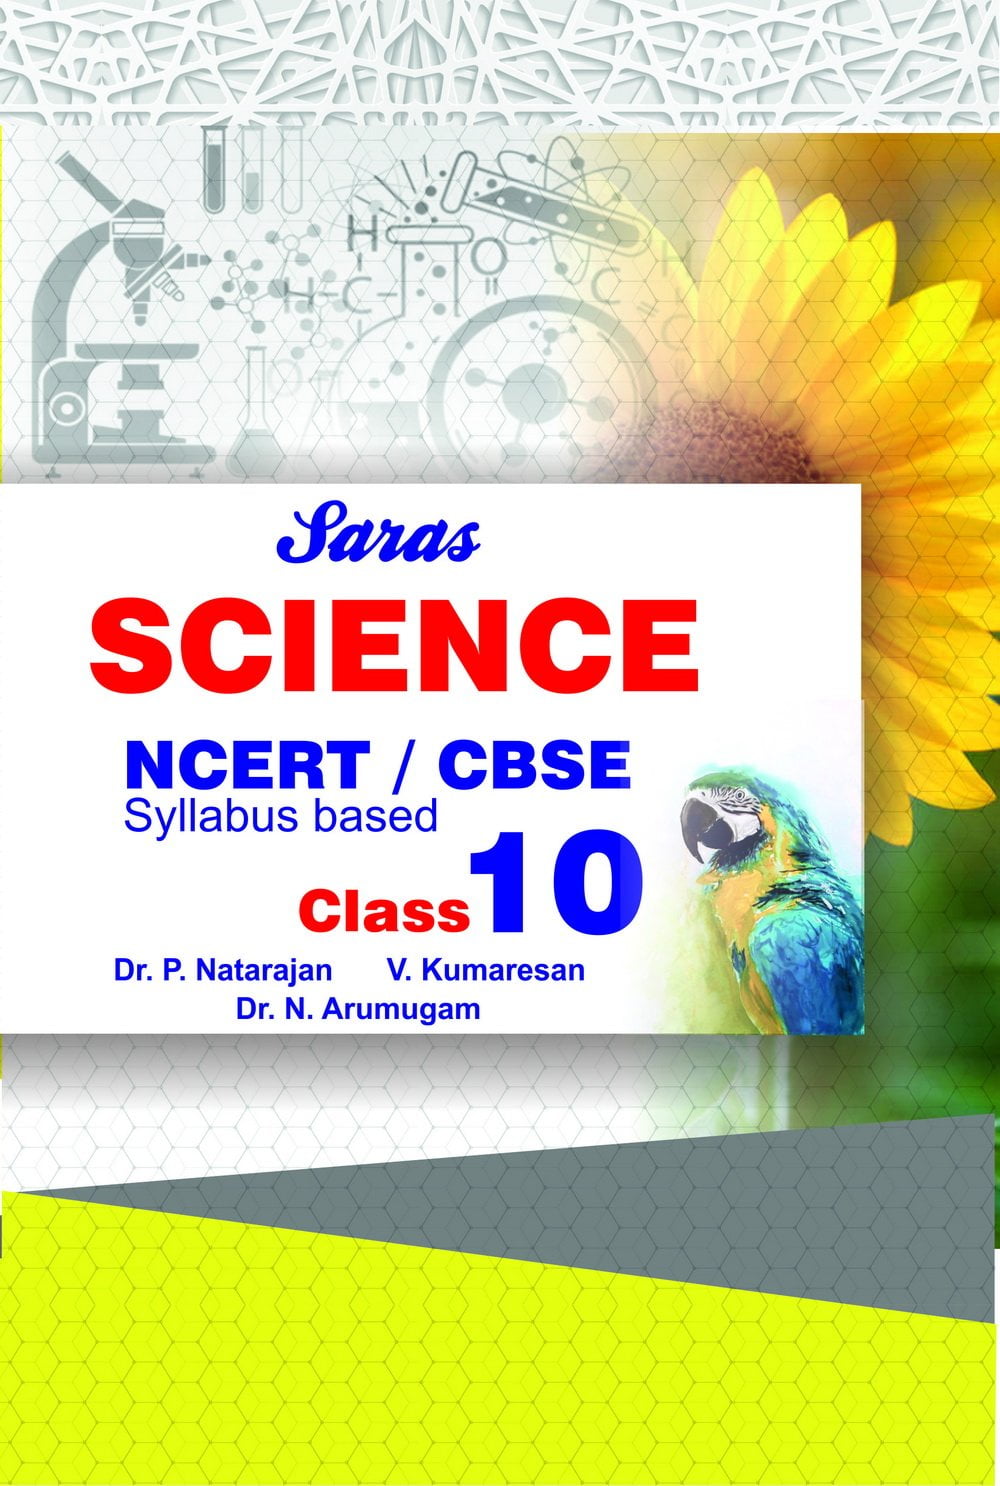 Science for 10th Standard NCERT / CBSE Syllabus